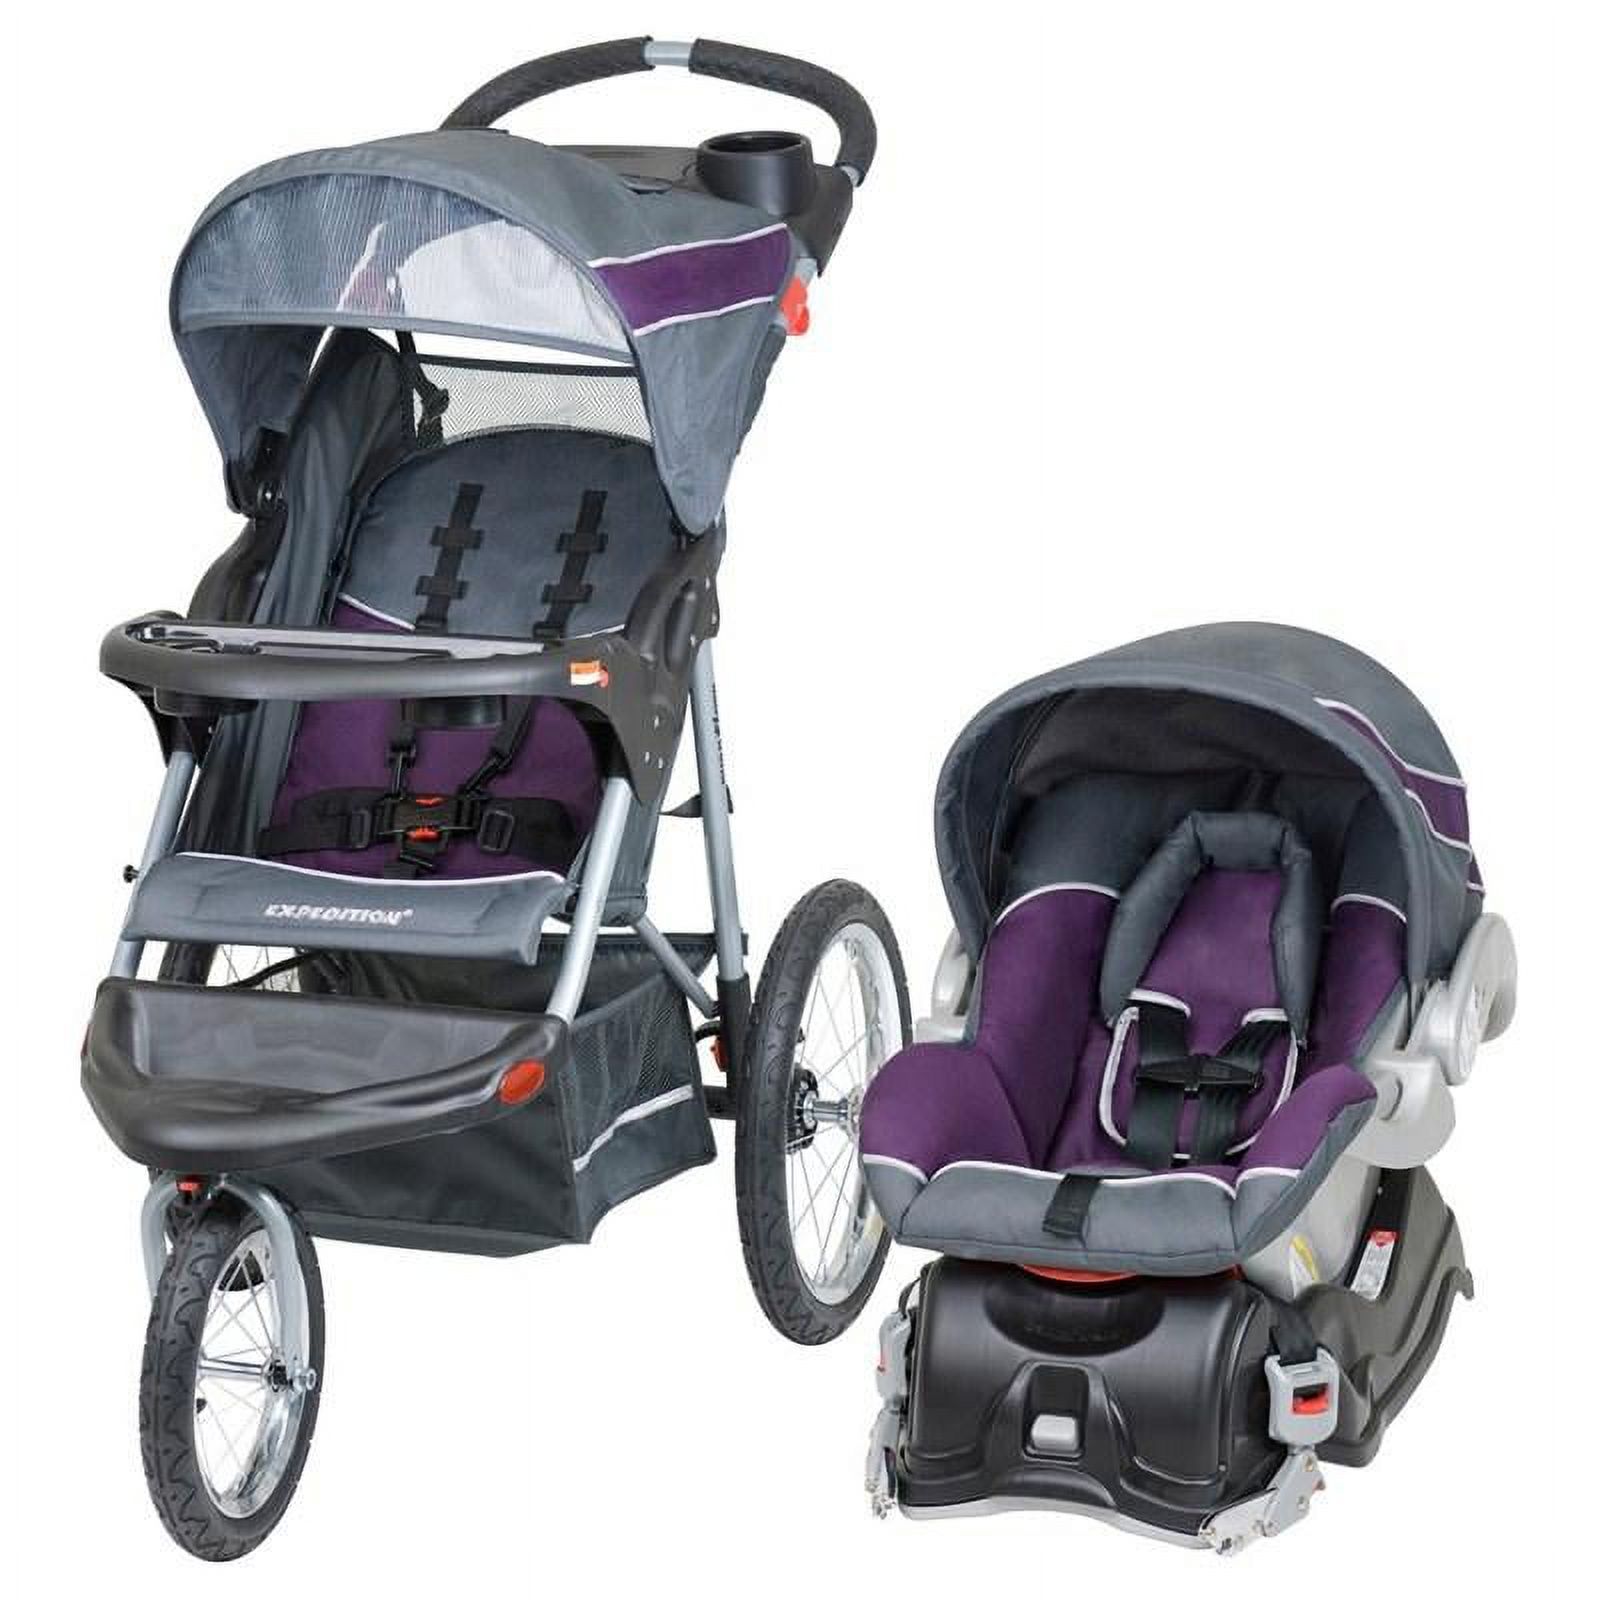 Baby Trend Expedition Travel System Stroller, Elixer - image 1 of 9